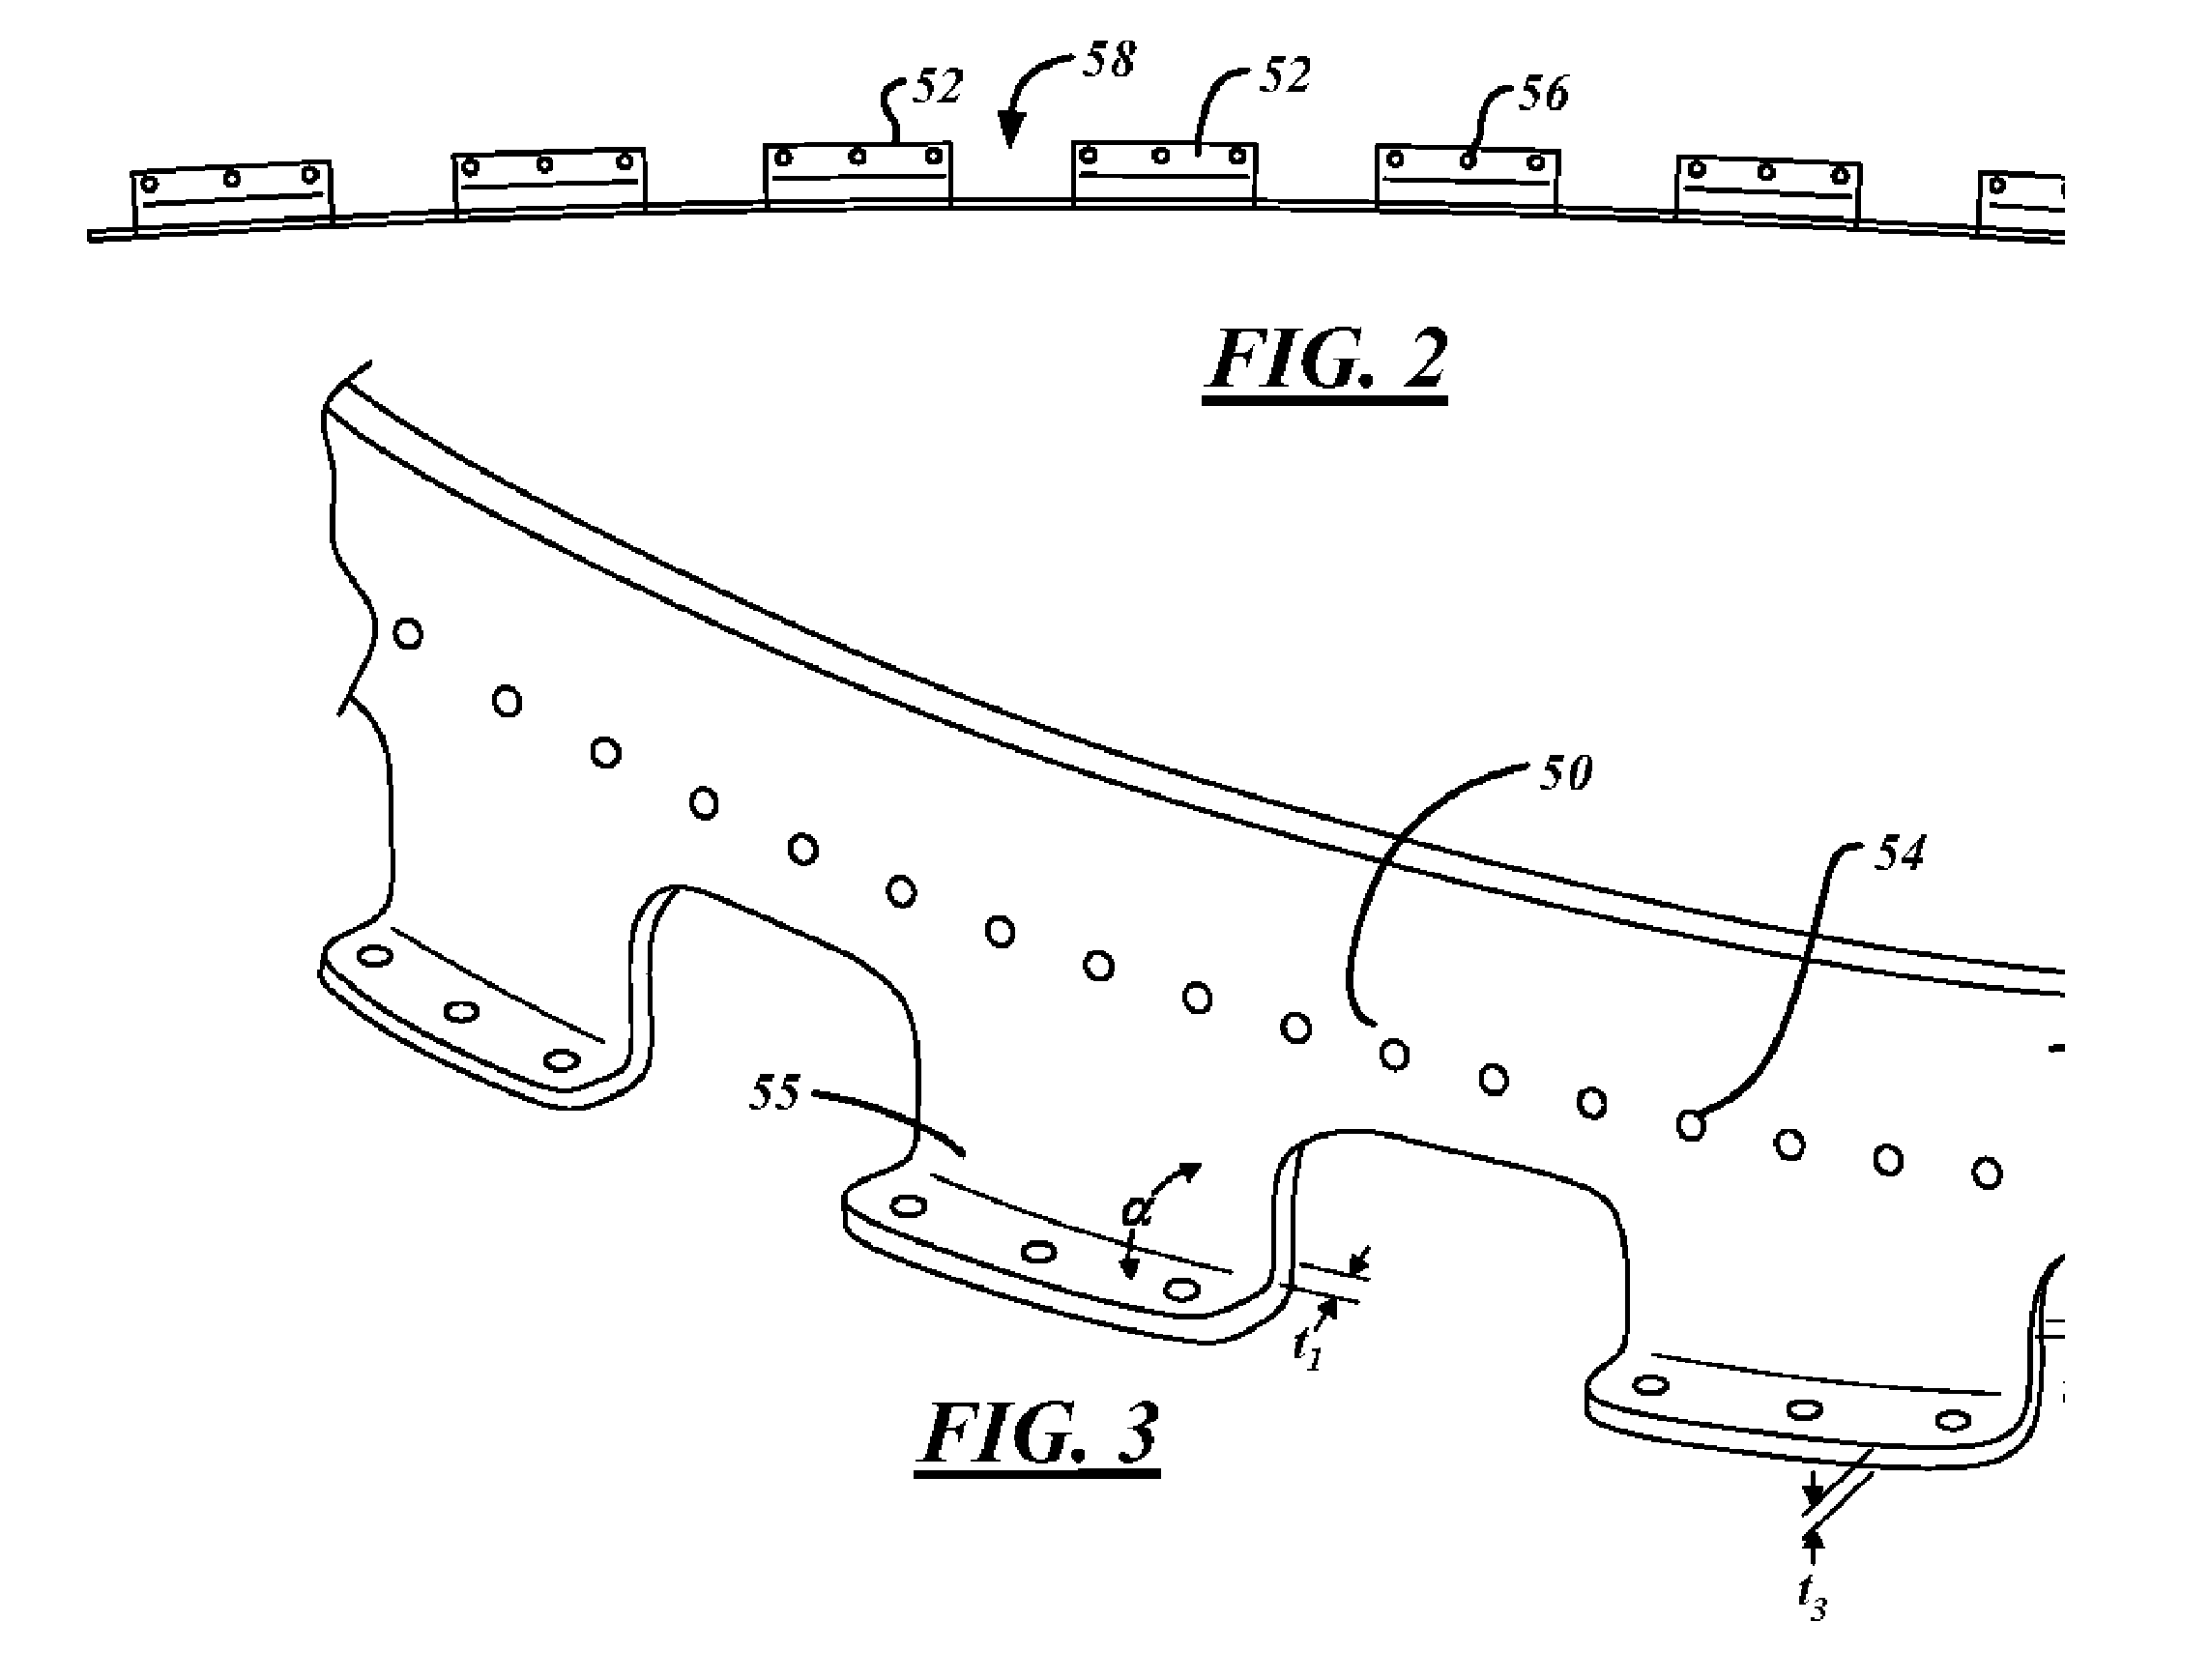 Method to control thickness in composite parts cured on closed angle tool